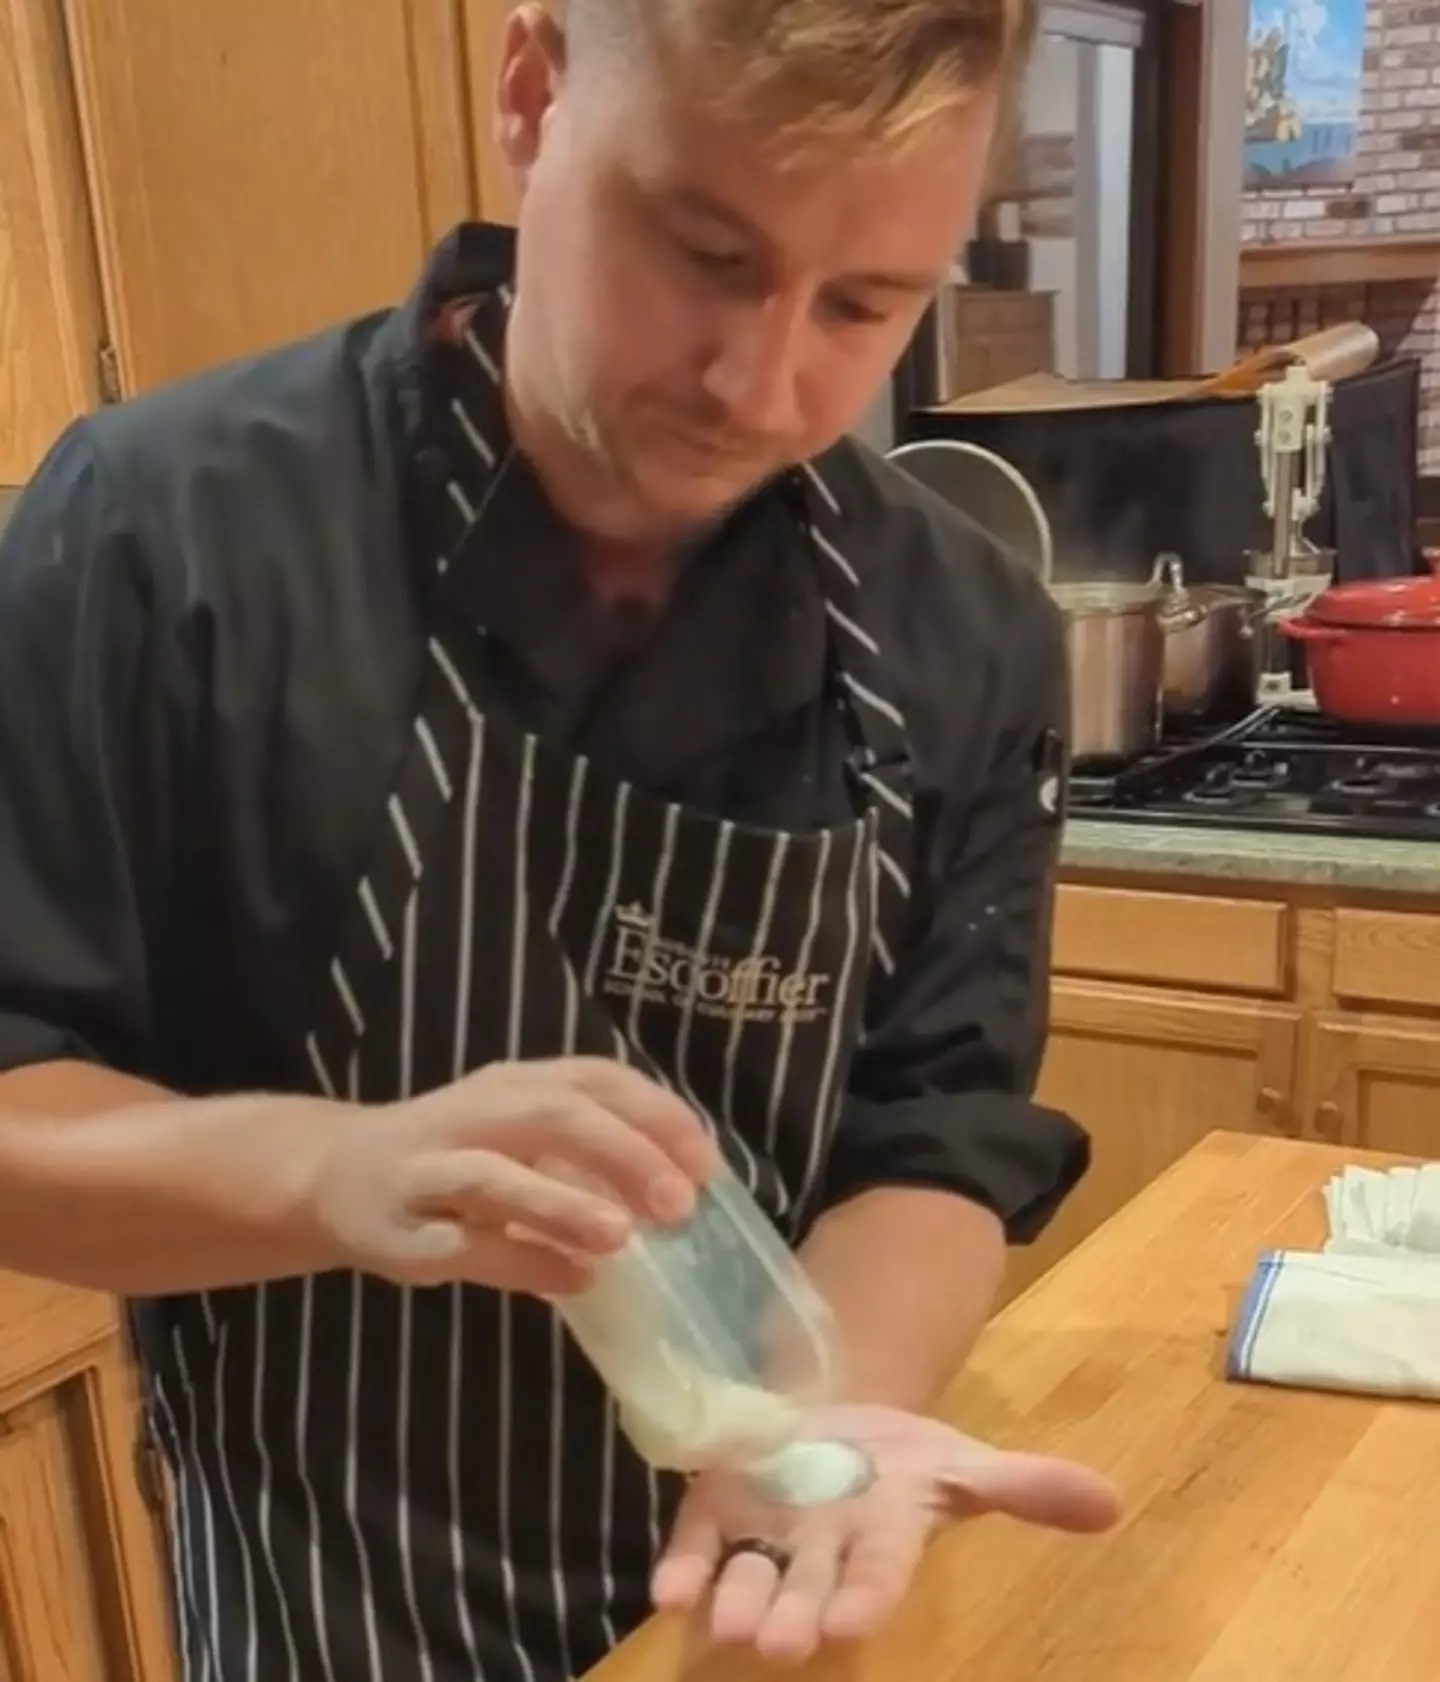 Bryce Norblom uses his hand tattoo to measure out ingredients while cooking..